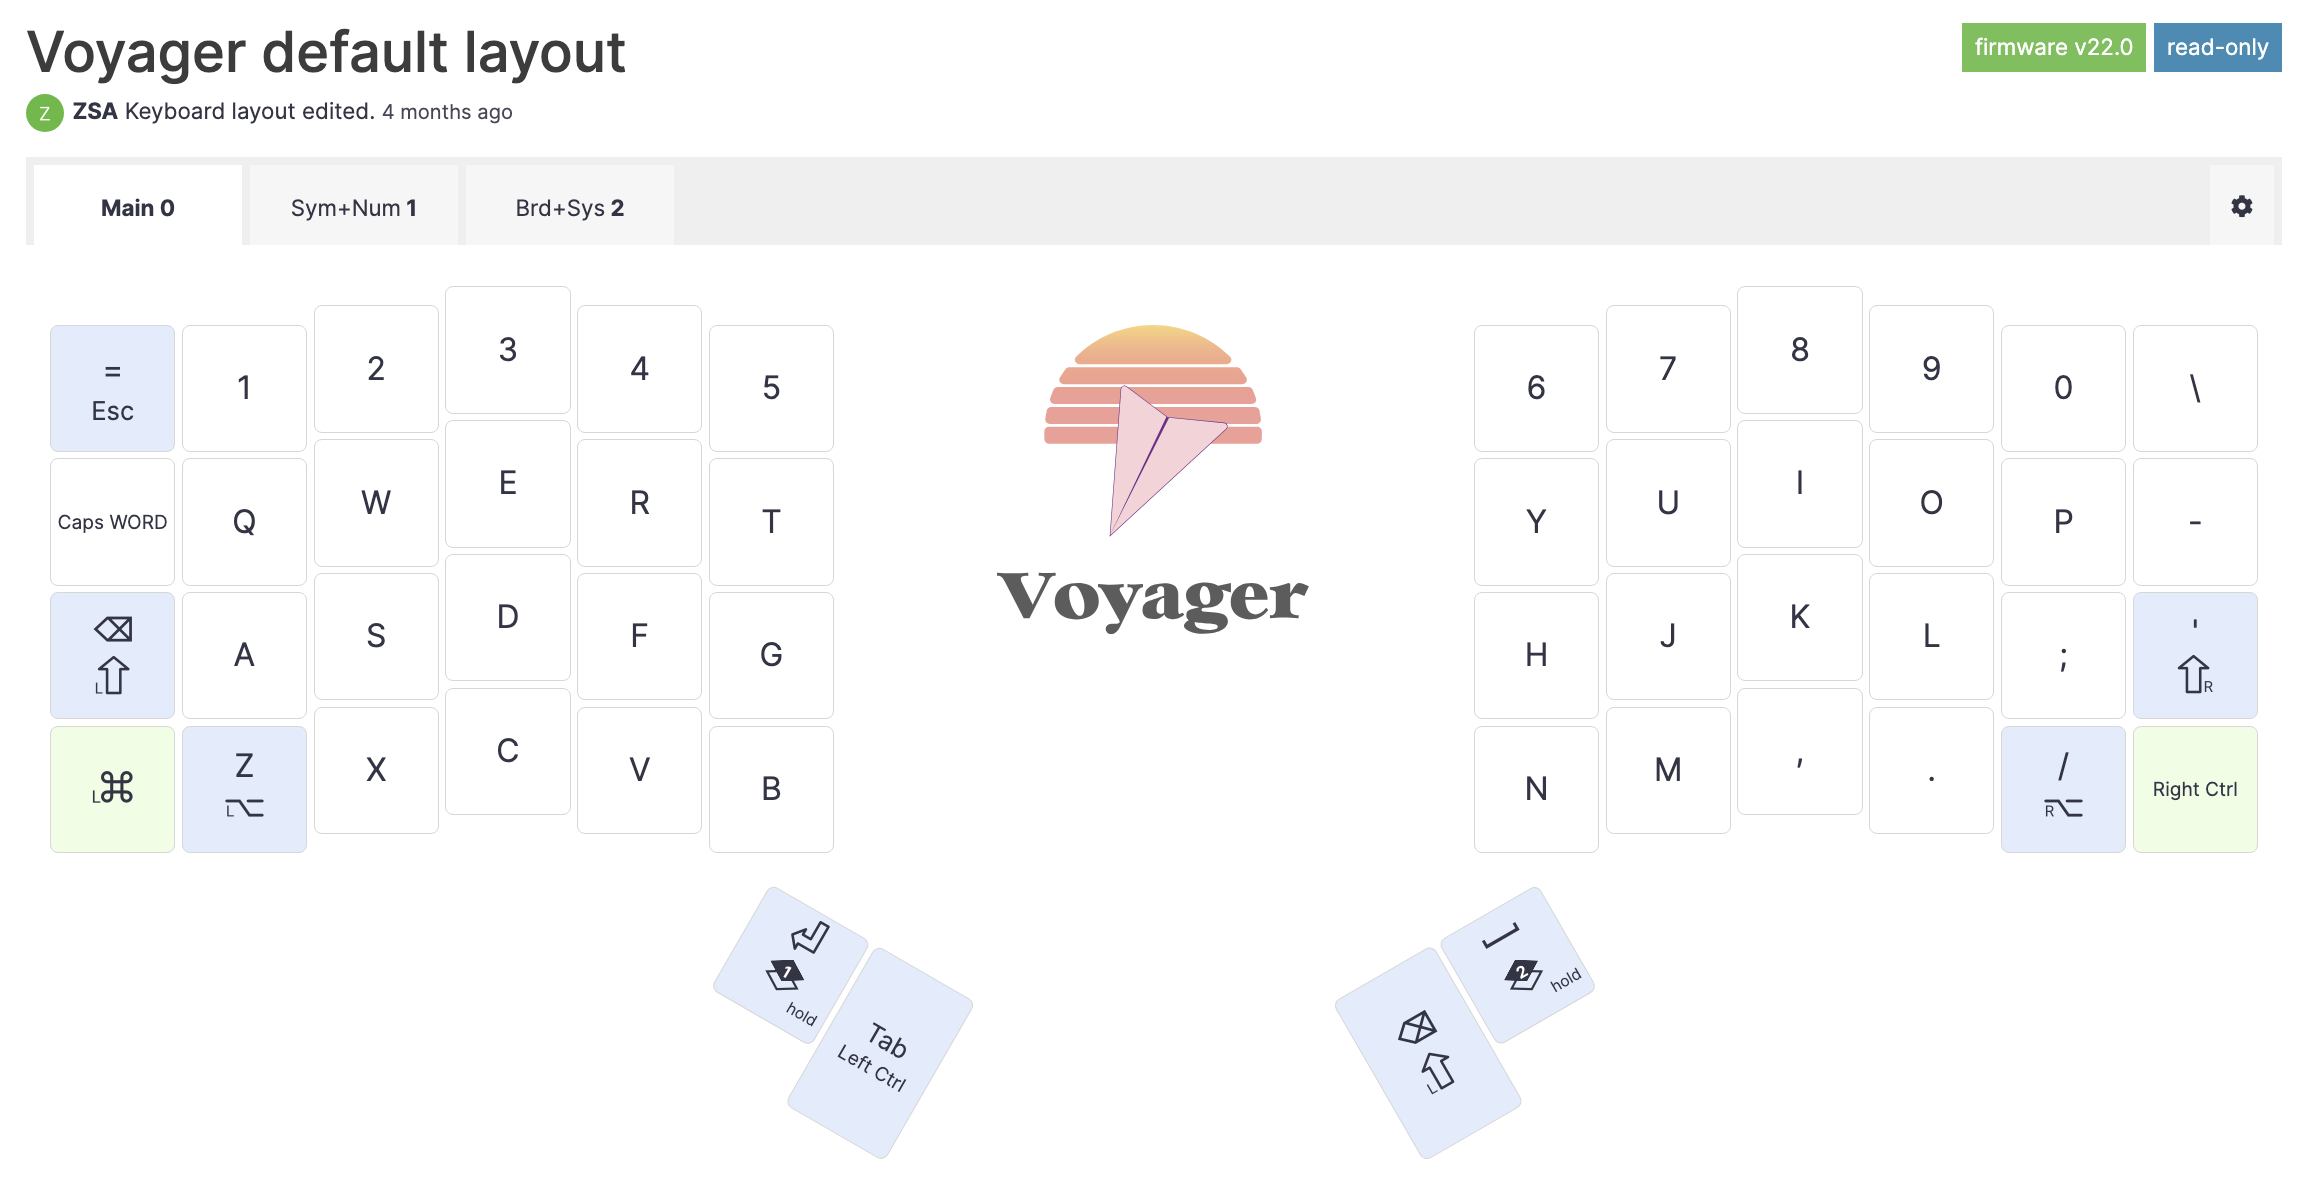 Voyager layout